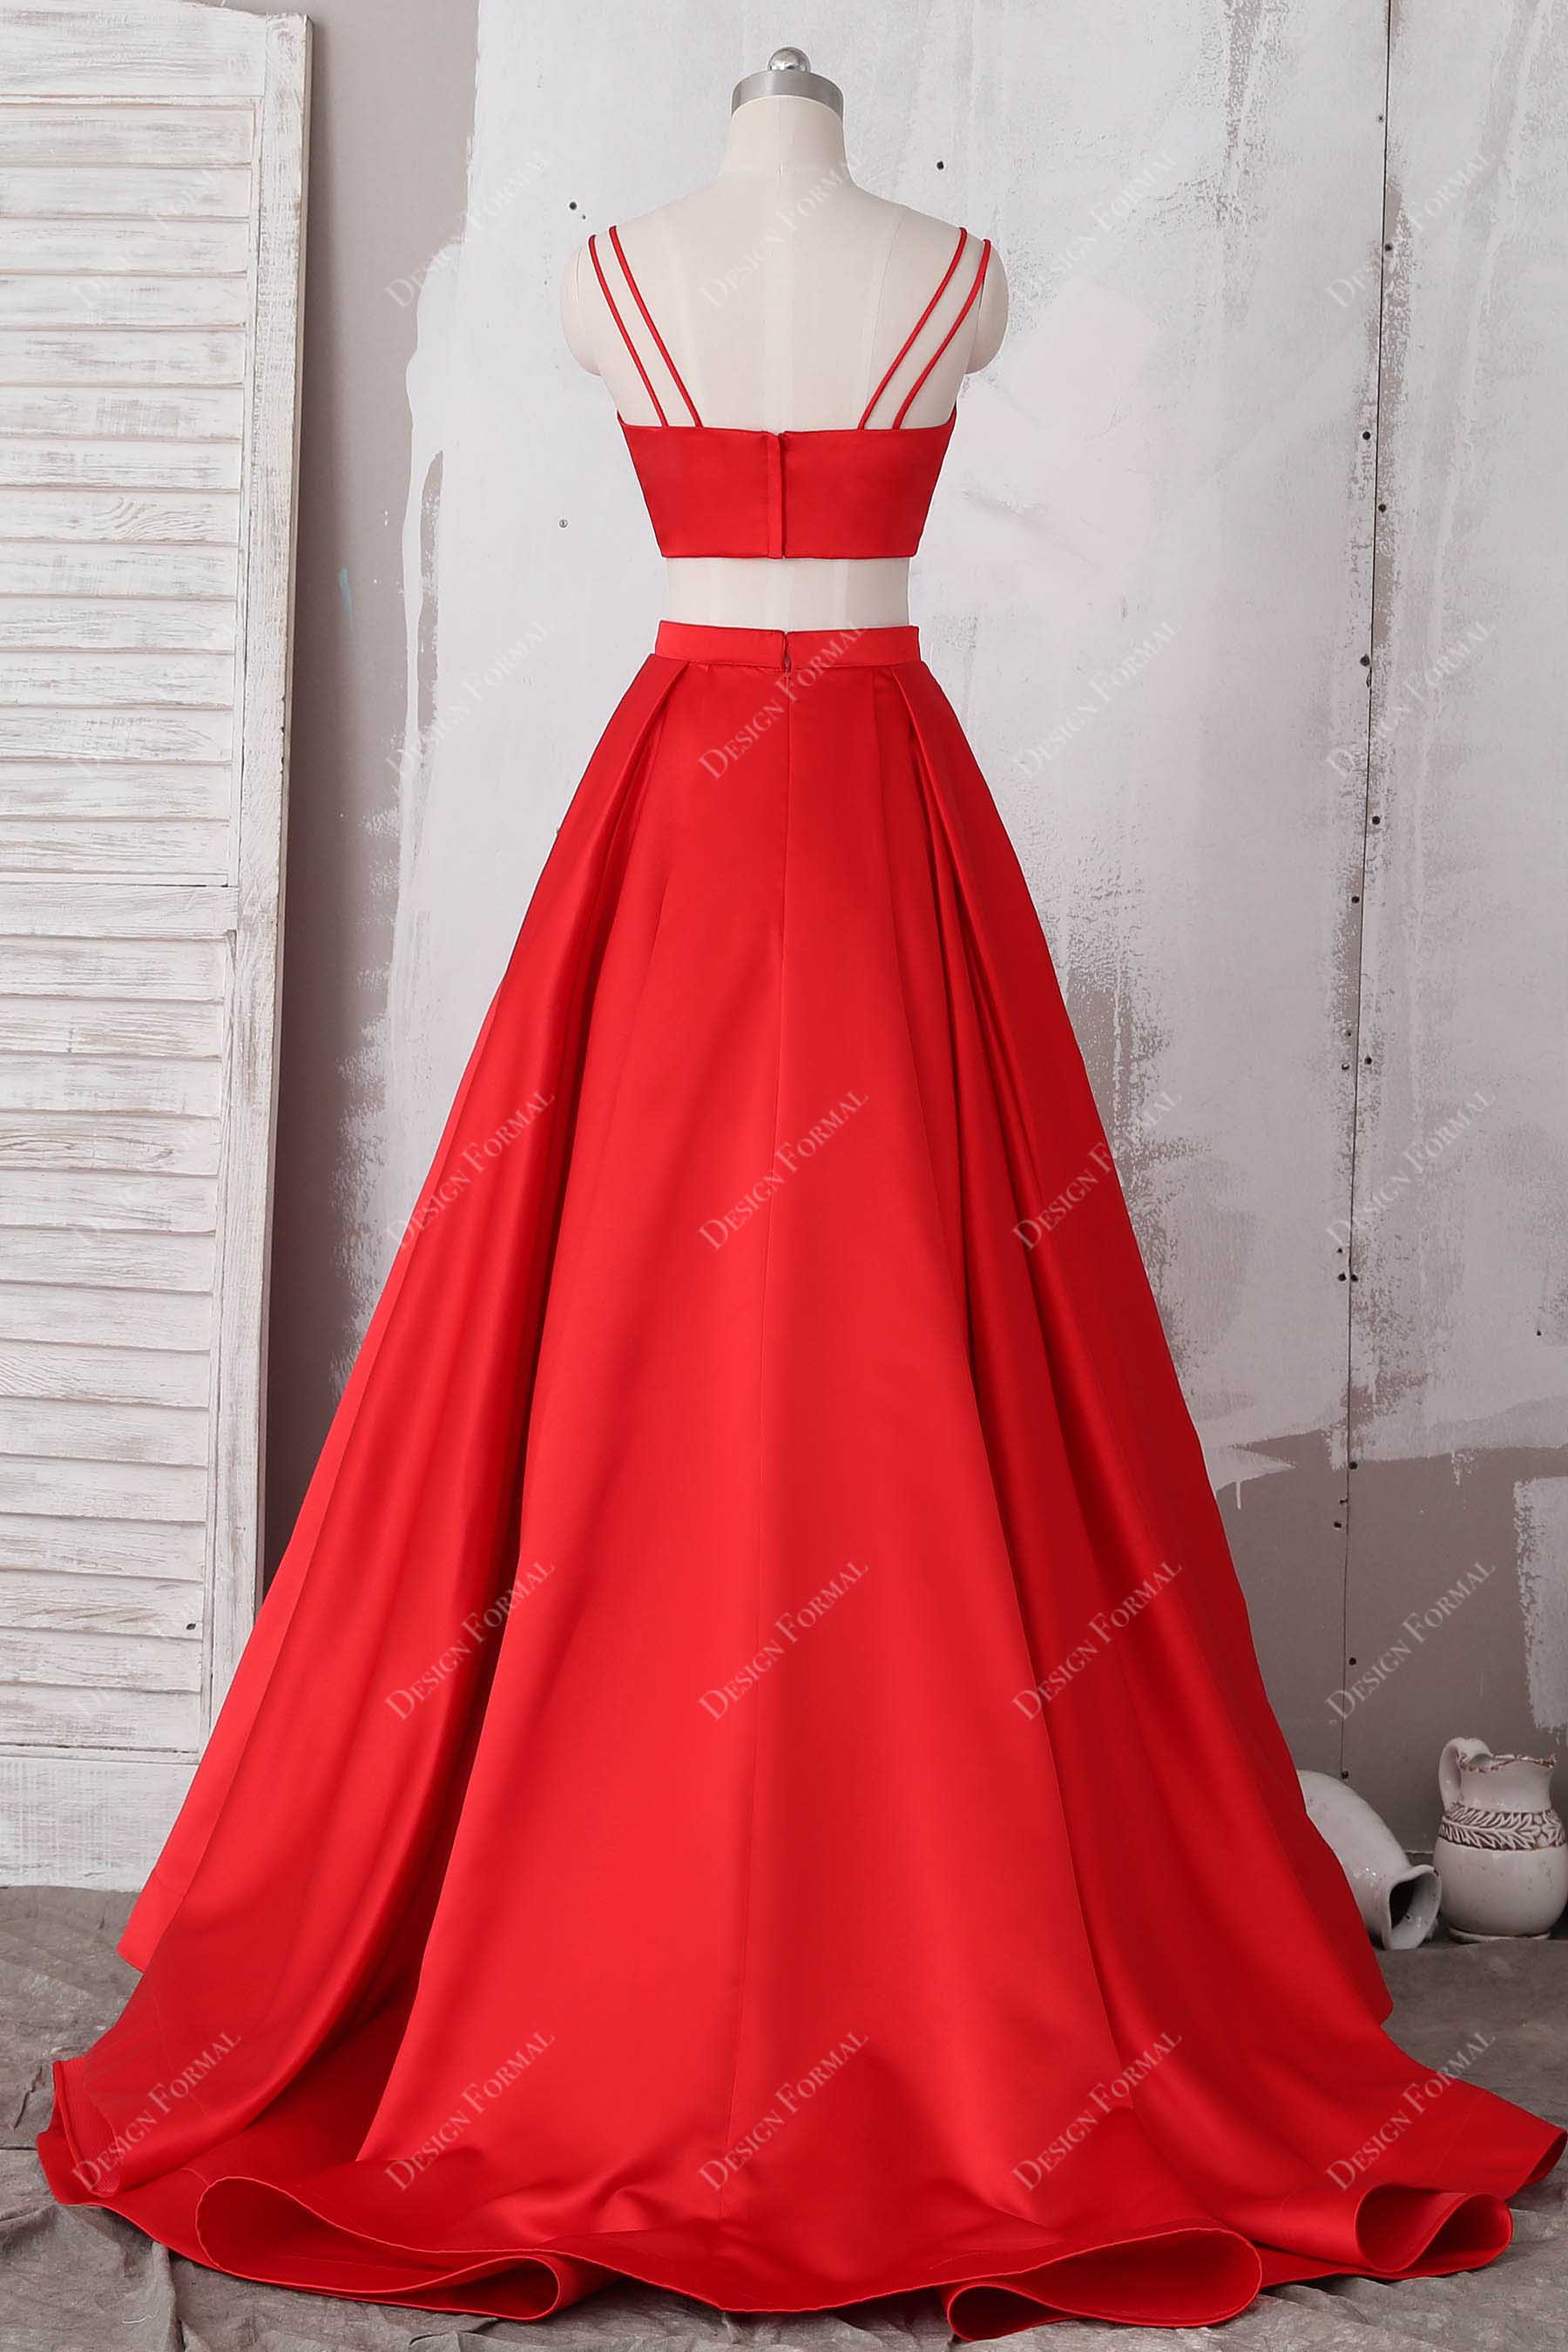 two-piece satin red prom dress